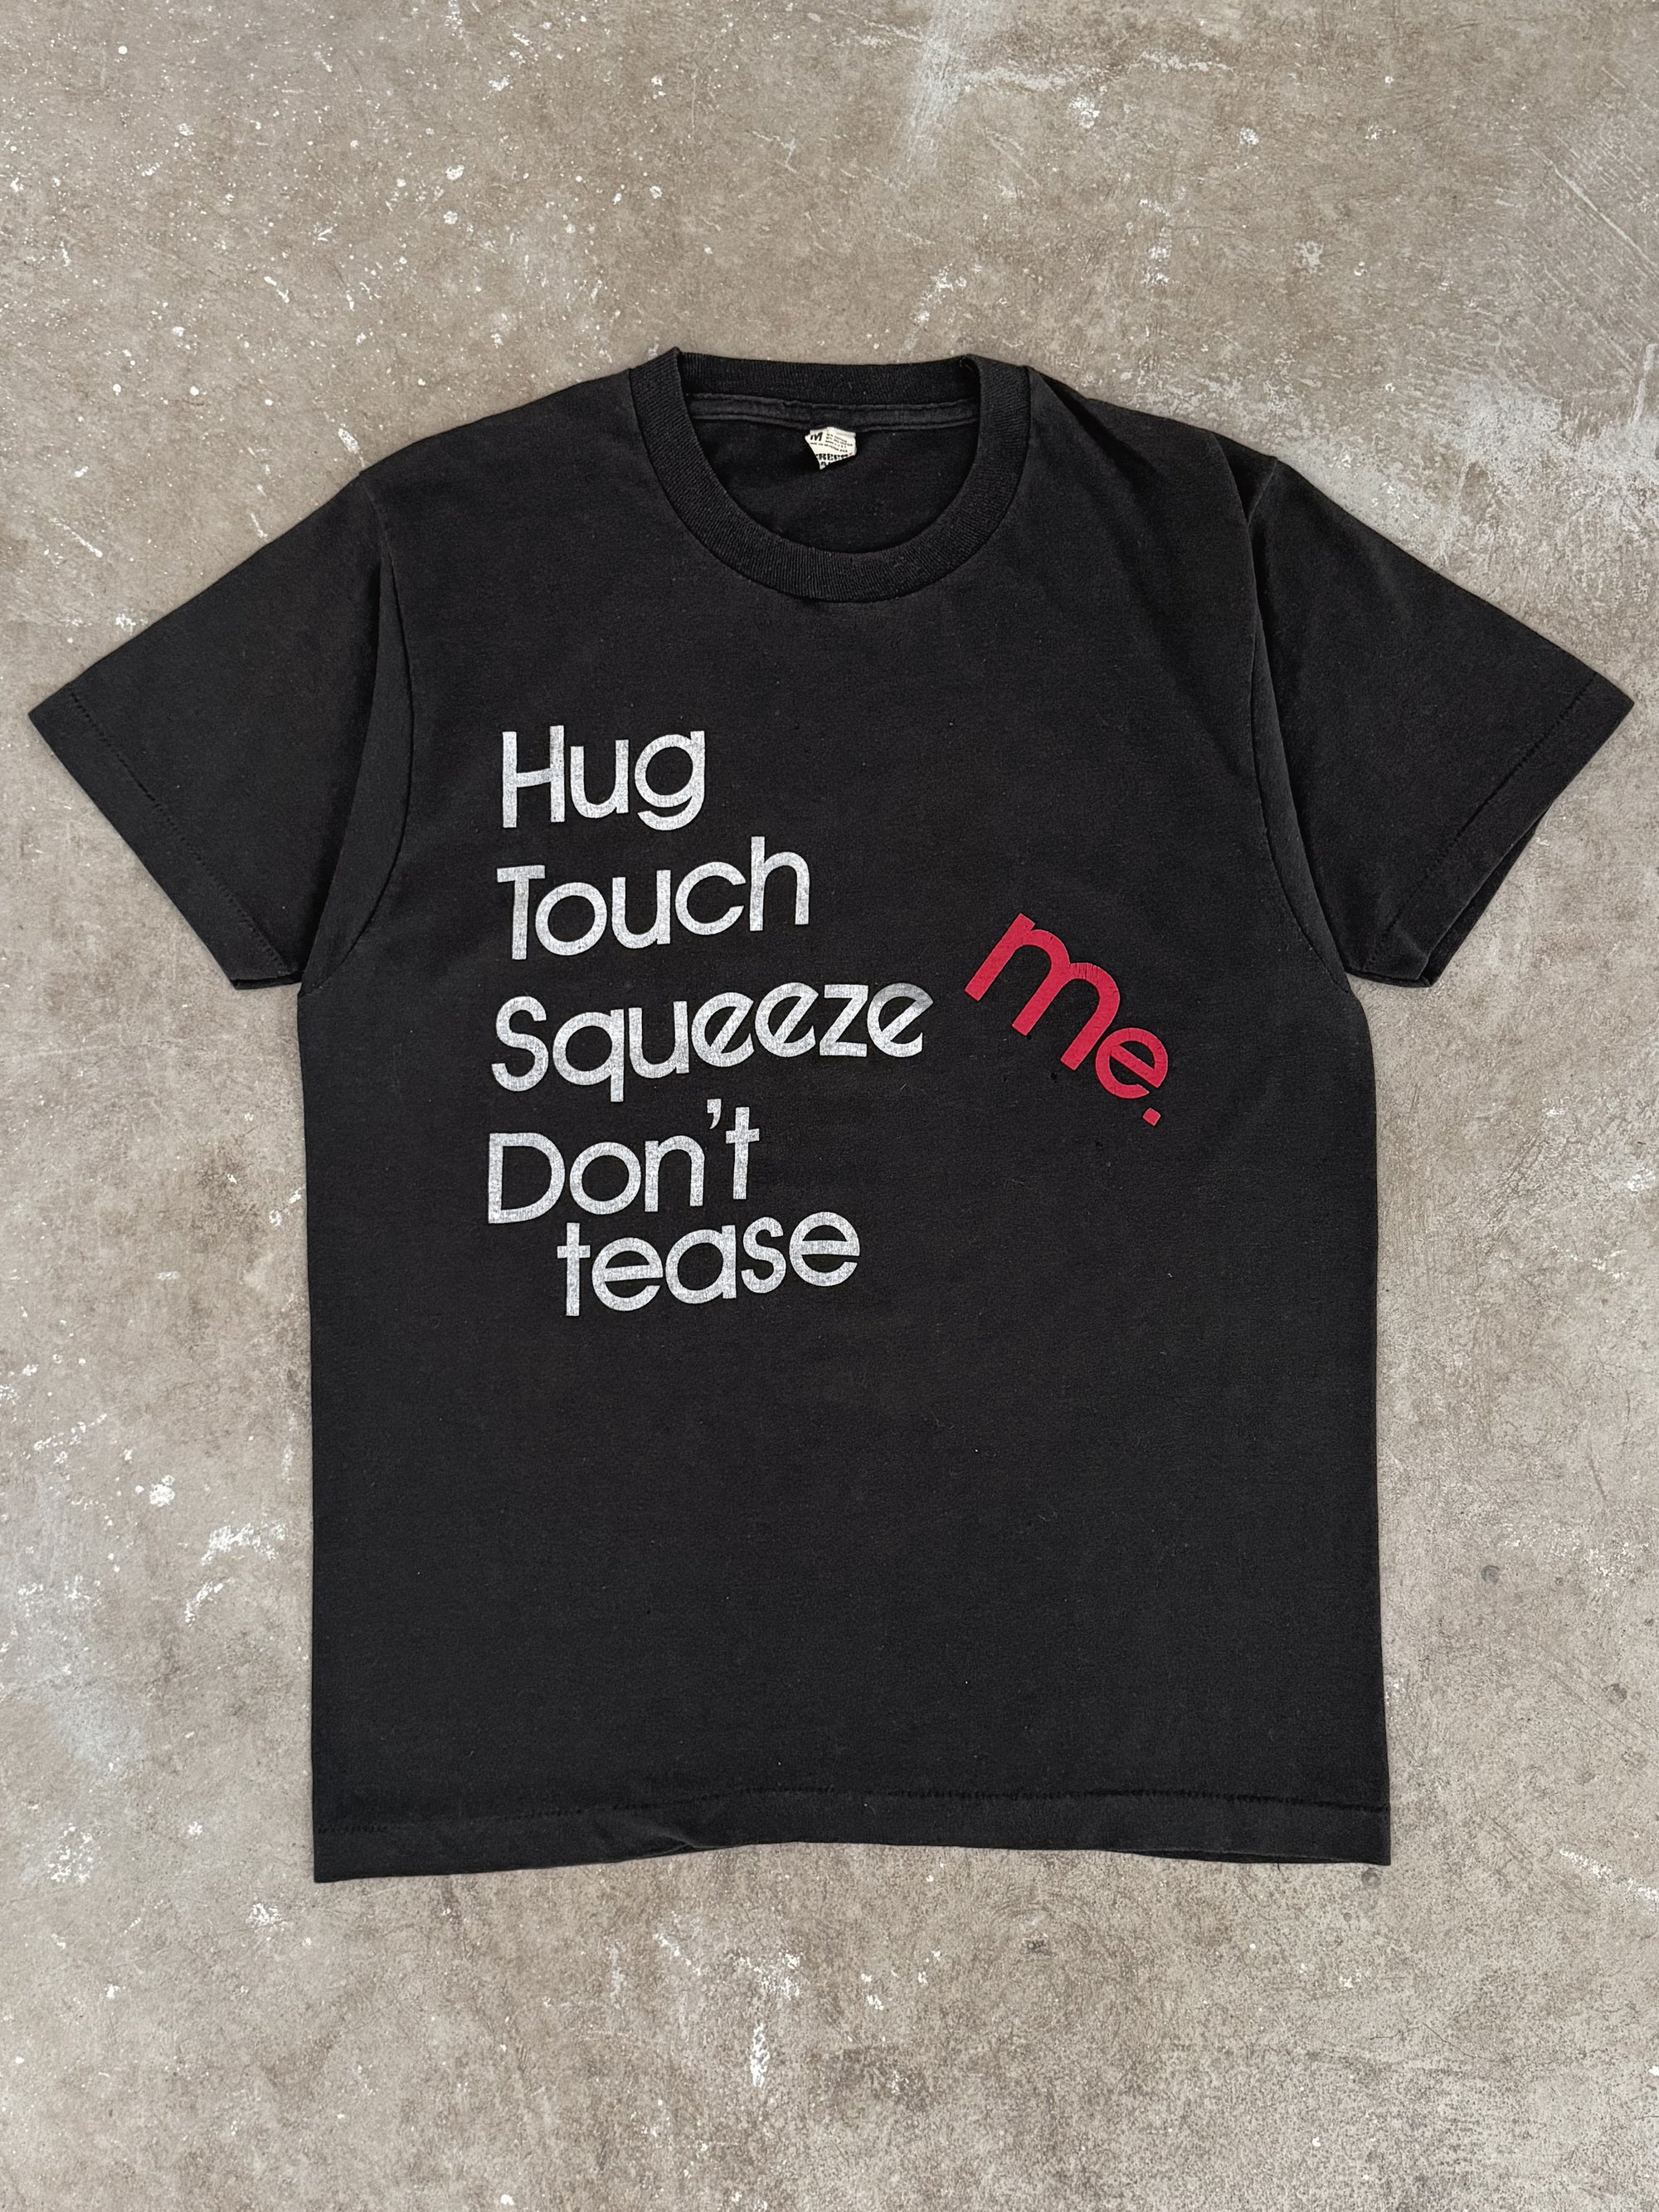 1980s "Hug Me Touch Me Squeeze Me" Tee (S)